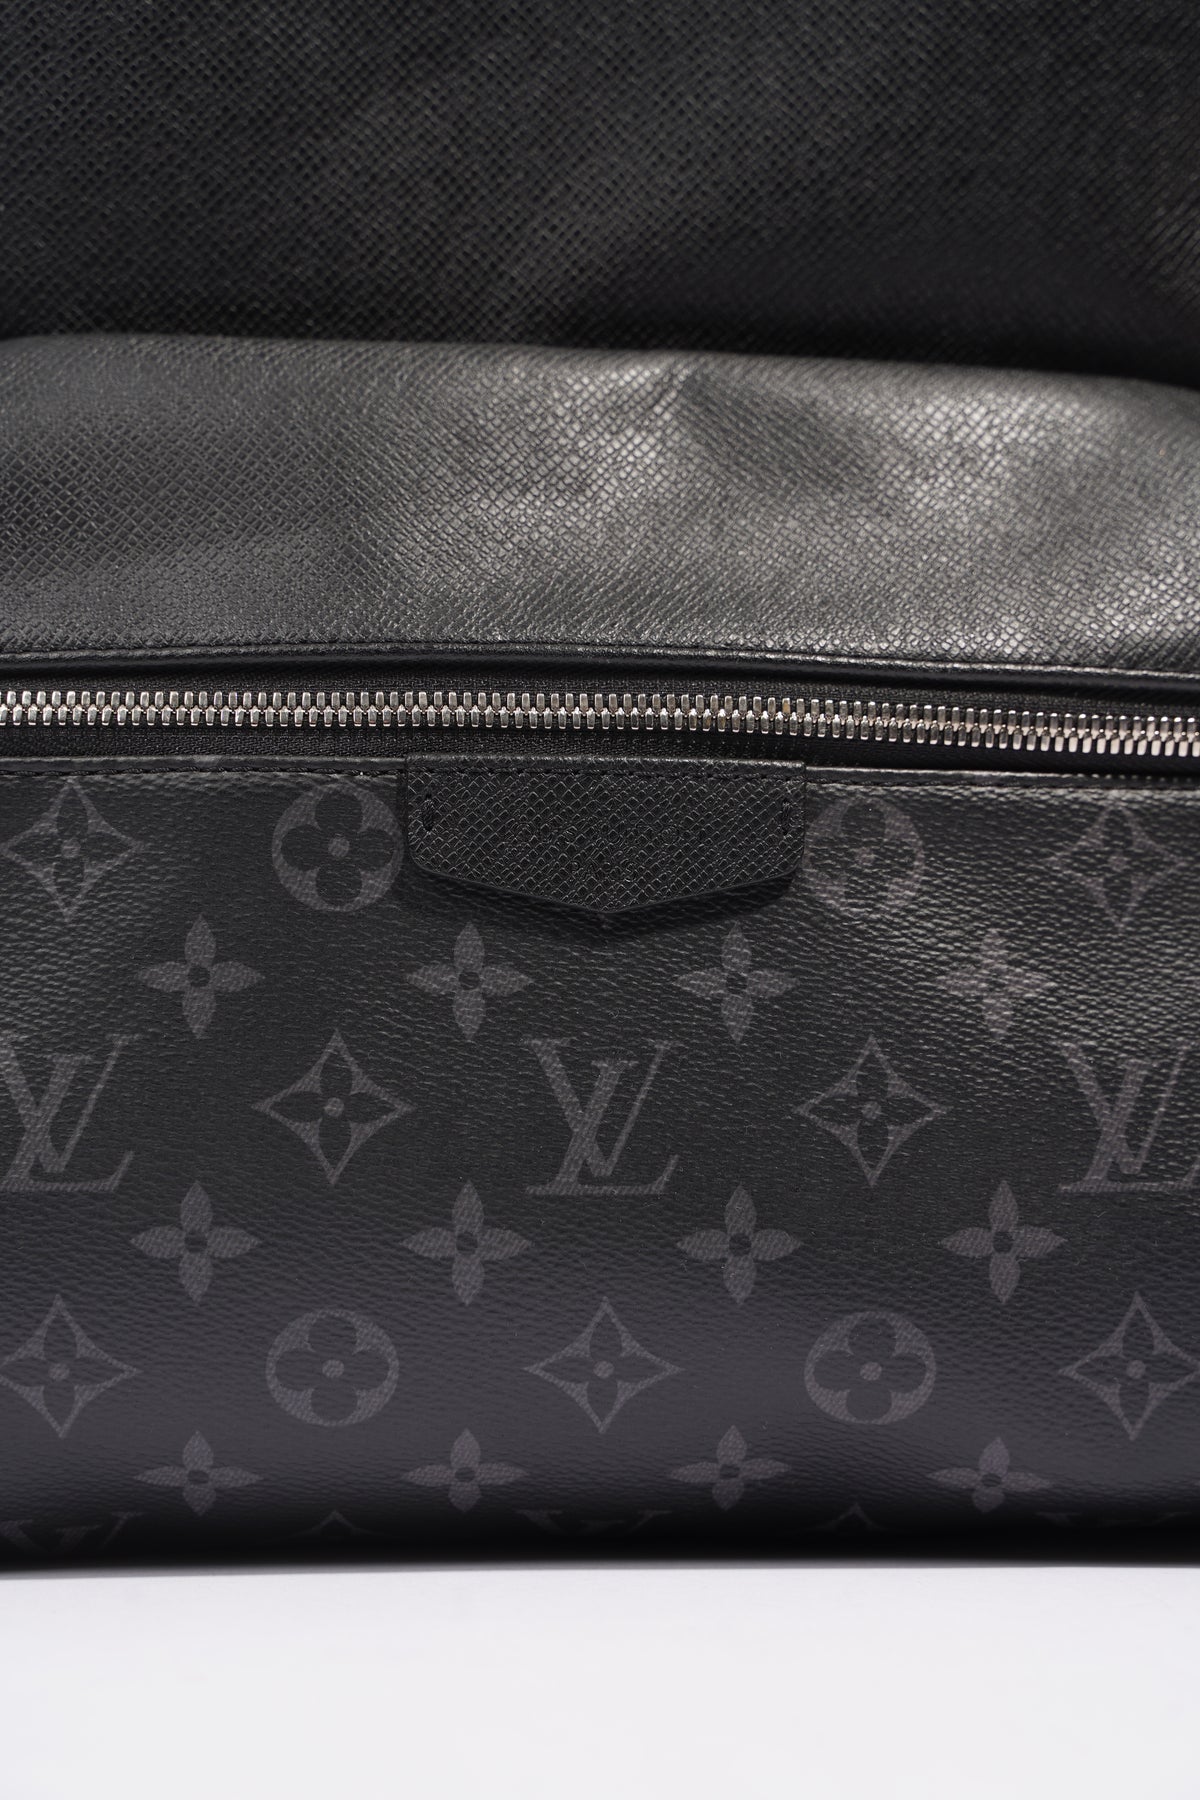 Louis Vuitton Backpack Collection For Men On The Move - Pursuitist